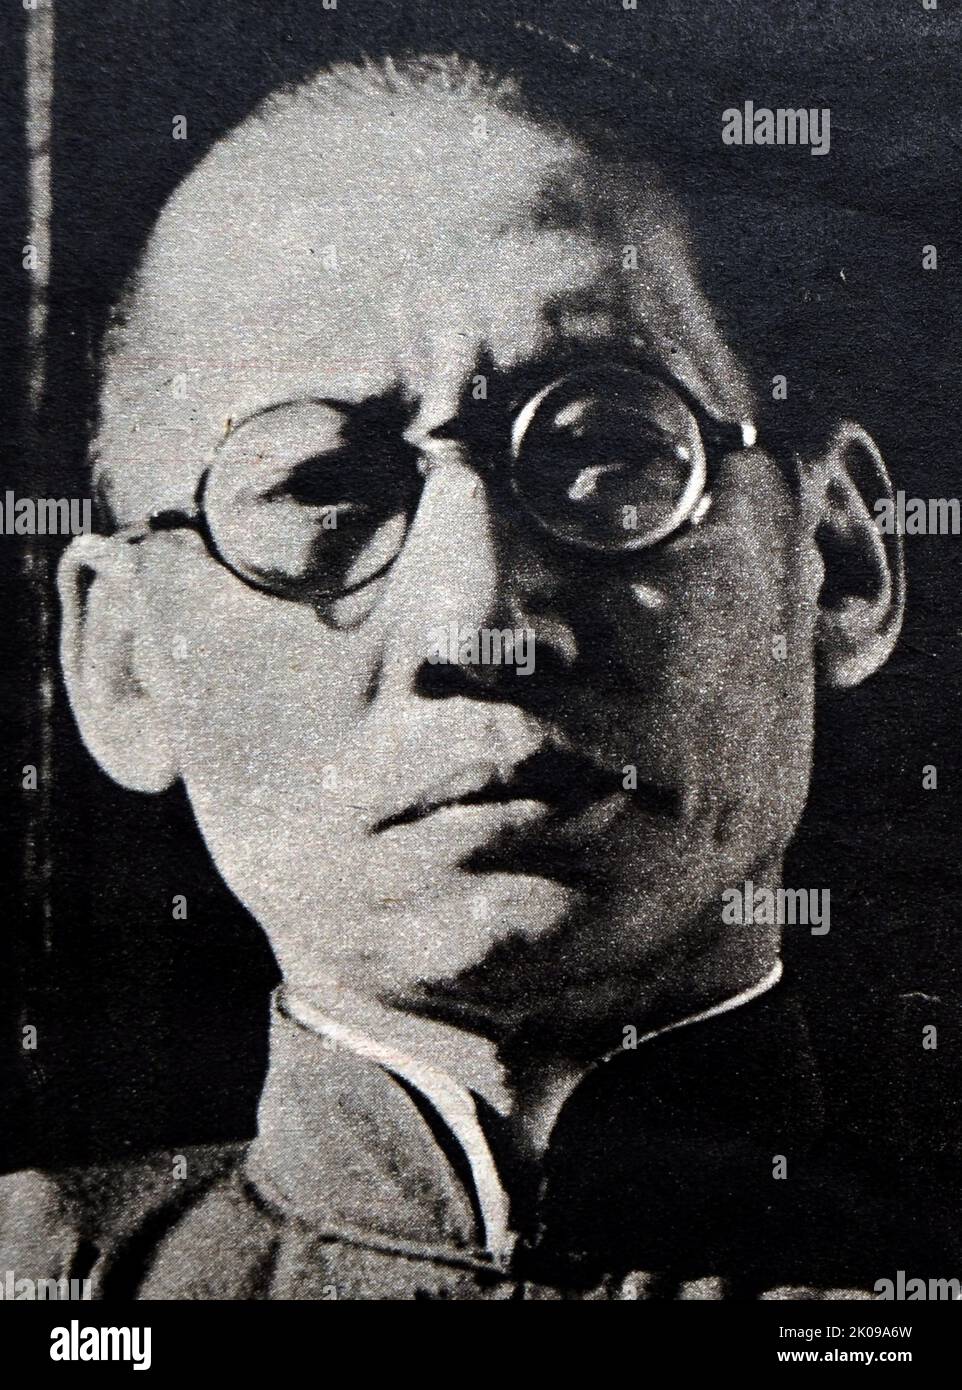 General Long Yun (27 November 1884 - 27 June 1962) was governor and warlord of the Chinese province of Yunnan from 1927 to October 1945, when he was overthrown in a coup (known as 'The Kunming Incident') by Du Yuming under the order of Chiang Kai-shek. Stock Photo